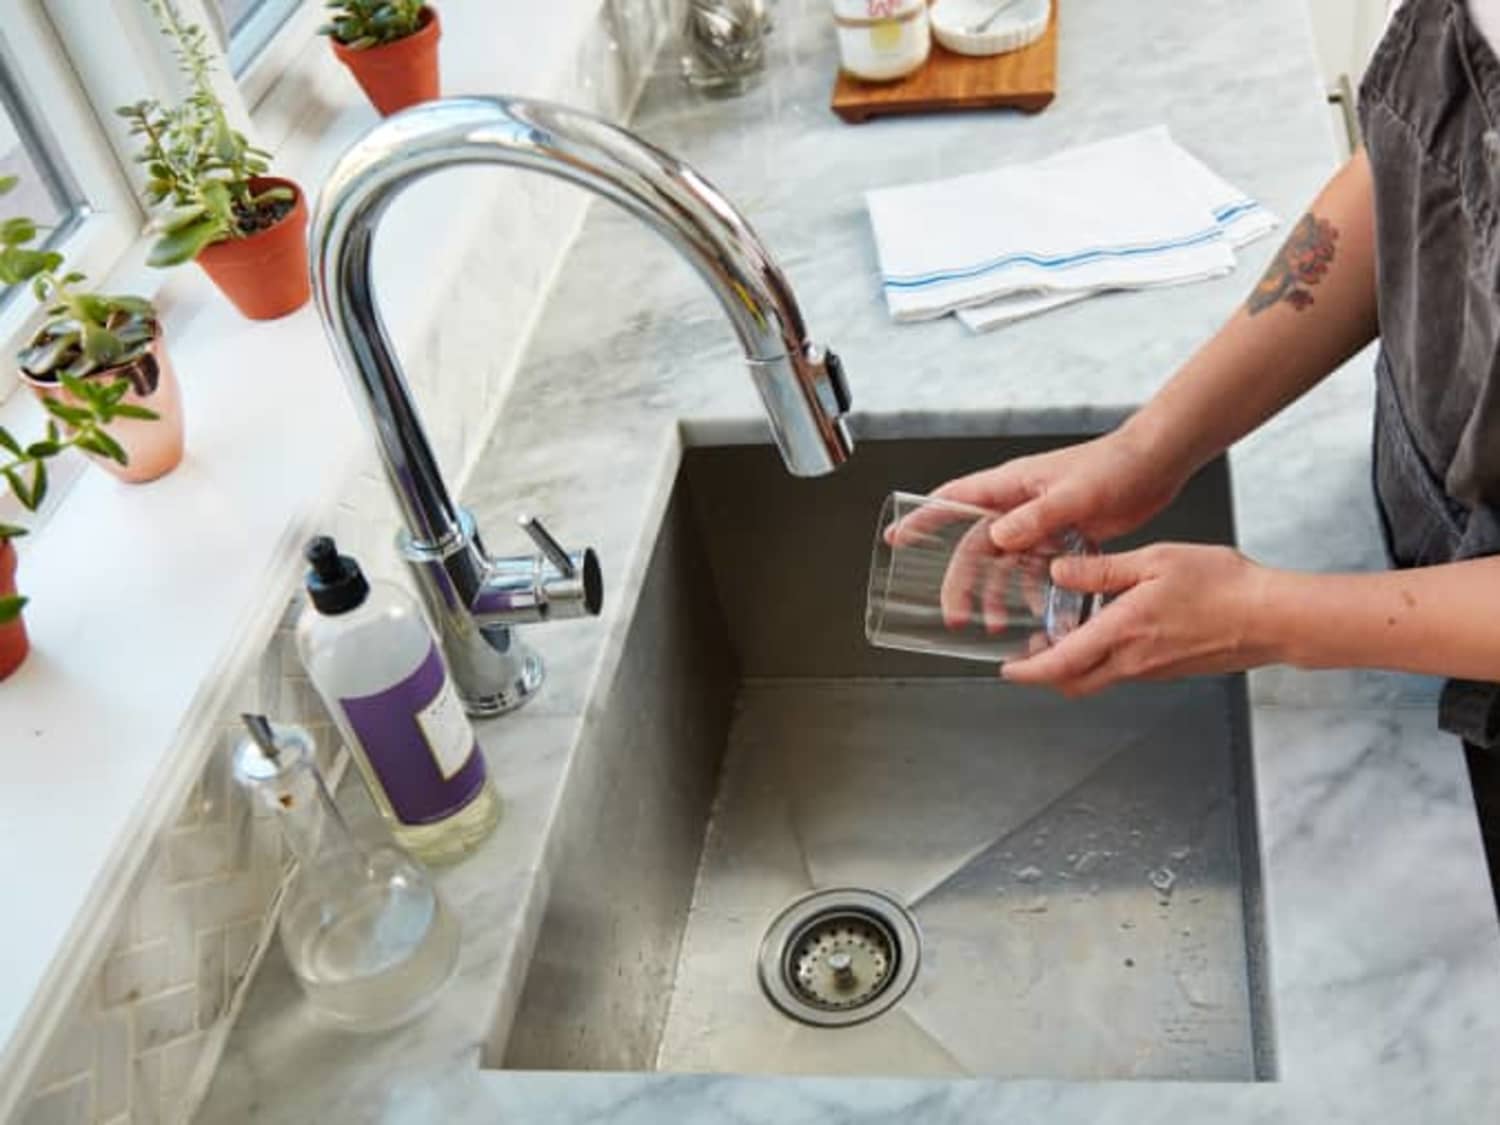 How to Clean and Maintain the Kitchen Sink - Cleaning Guide by Fantastic